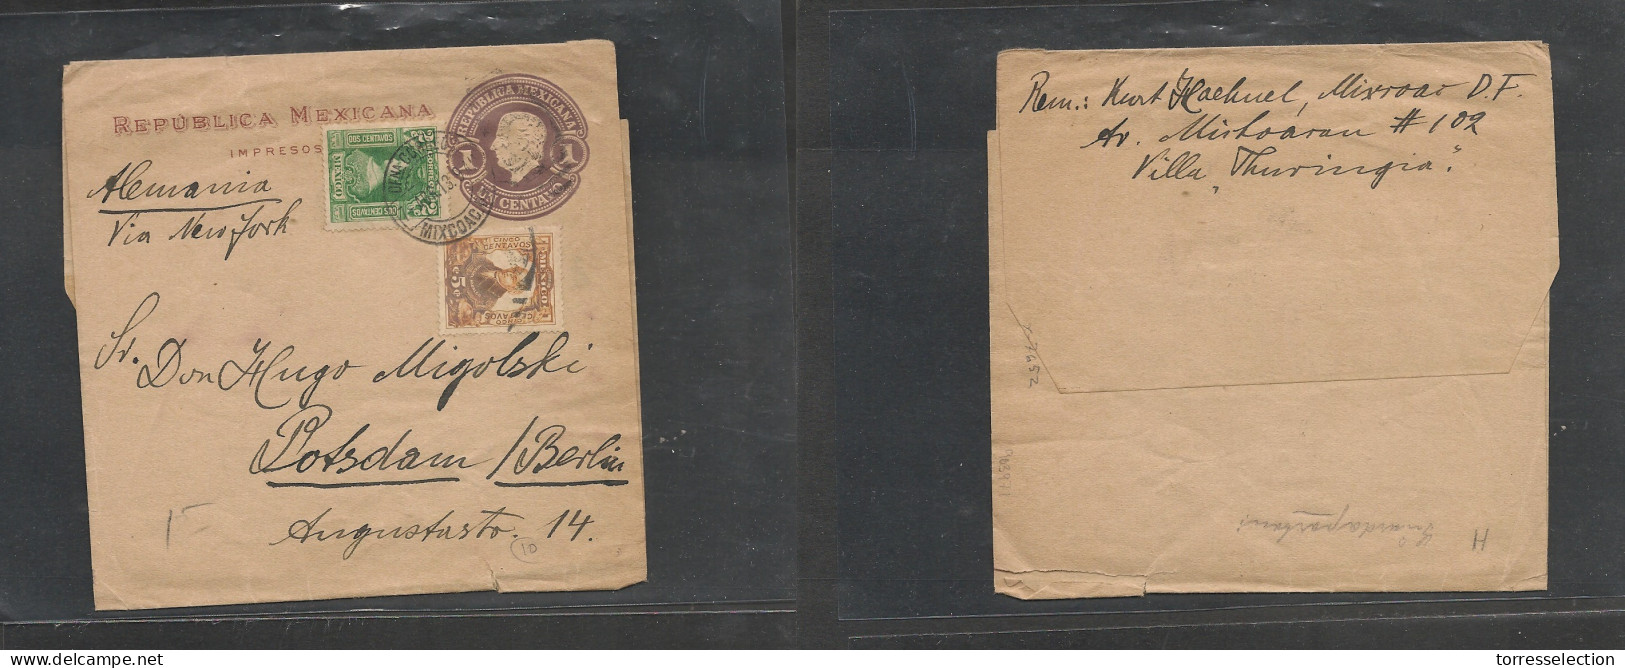 MEXICO. Mexico Cover - 1913 Stat Wcomplete Wrapper Mixcoac To Berlin Germany 1c Stat+ Two Adtls, Vf XSALE. - Mexiko